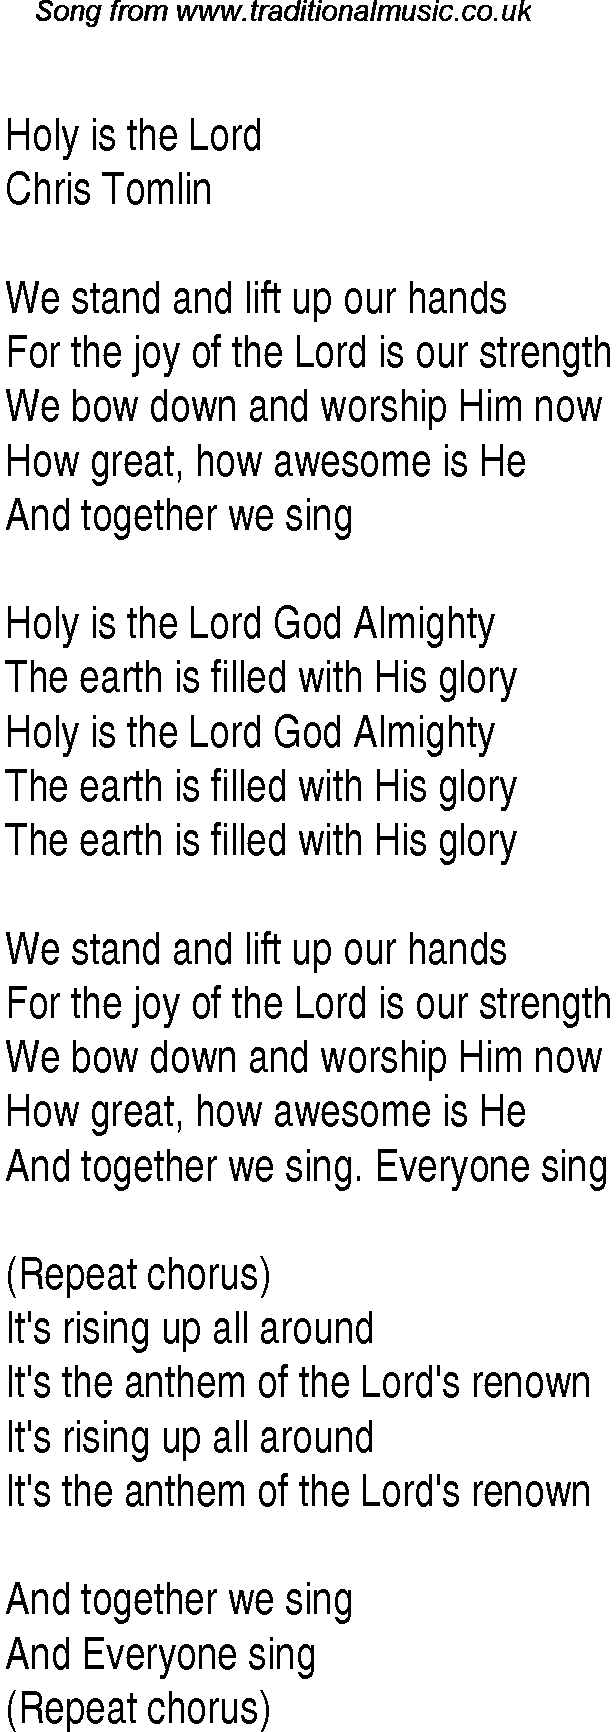 Gospel Song: holy-is-the-lord, lyrics and chords.